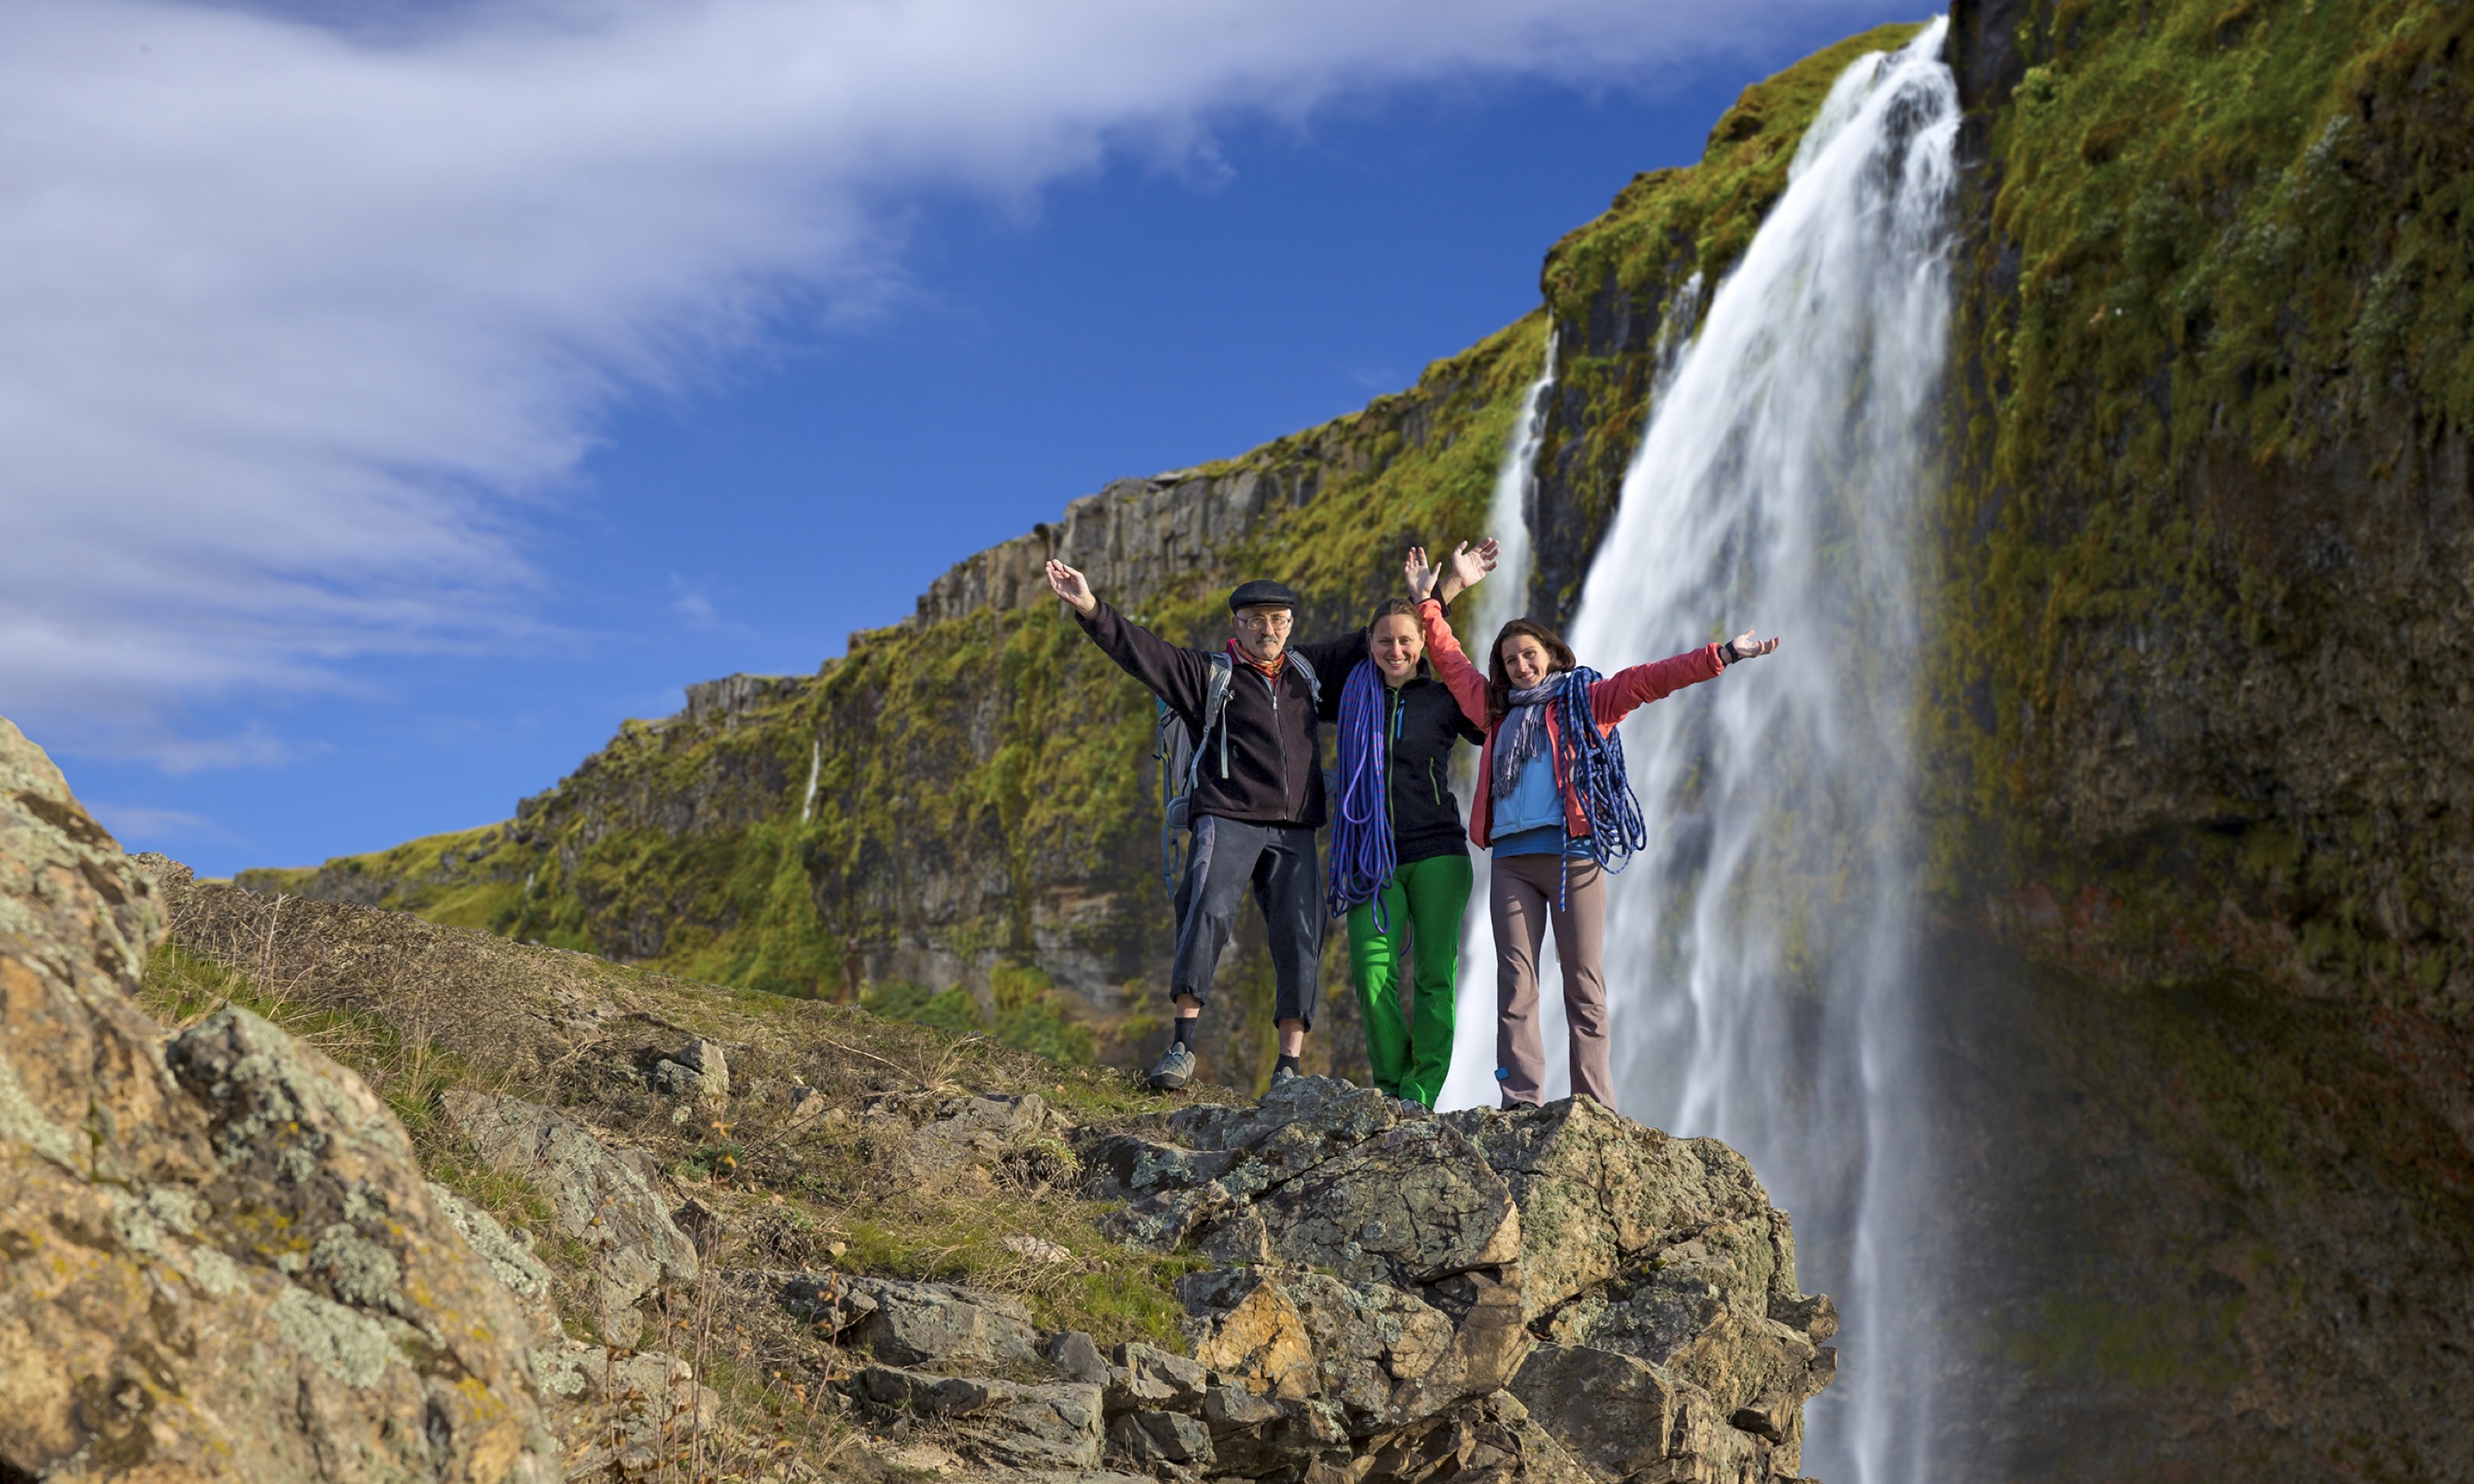 Family near waterfall in Iceland (Shutterstock.com. See main credit below)